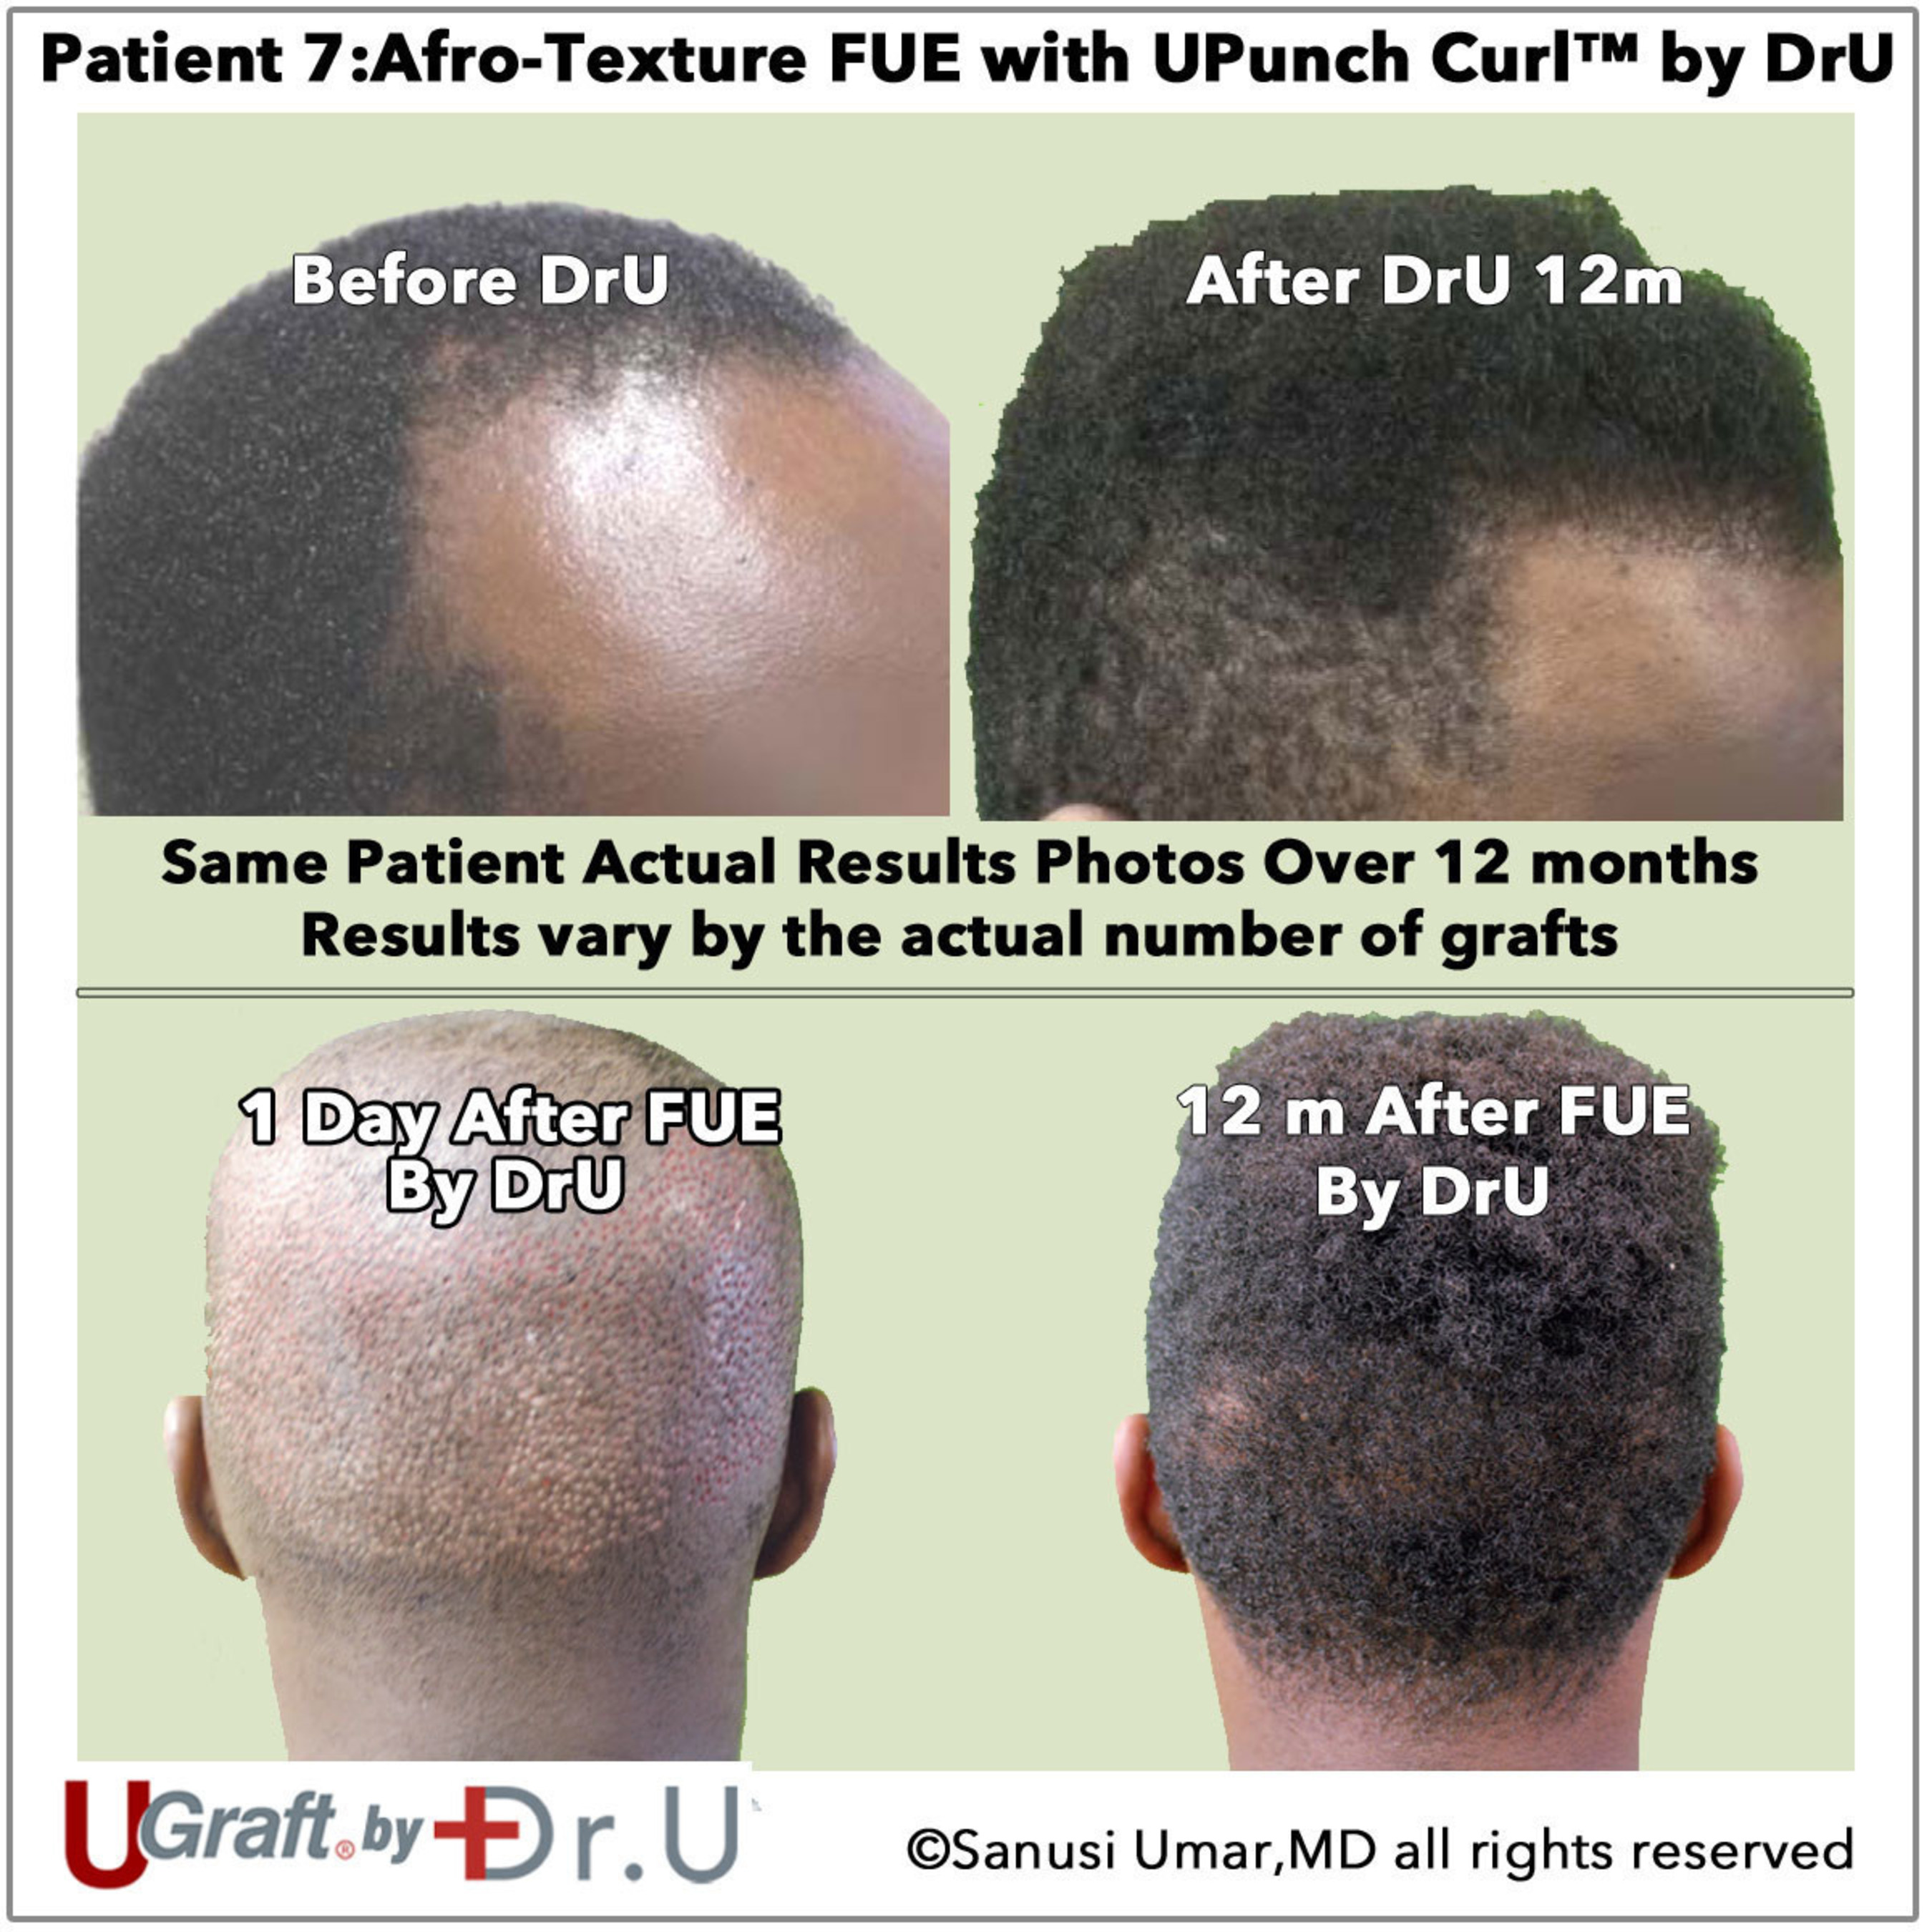 Dr. Sanusi Umar Invents New Hair Restoration Tools for Afro-Textured Hair: FUE  Hair Transplants Possible For Tight Curly Hair - Plastic and Reconstructive  Surgery Journal